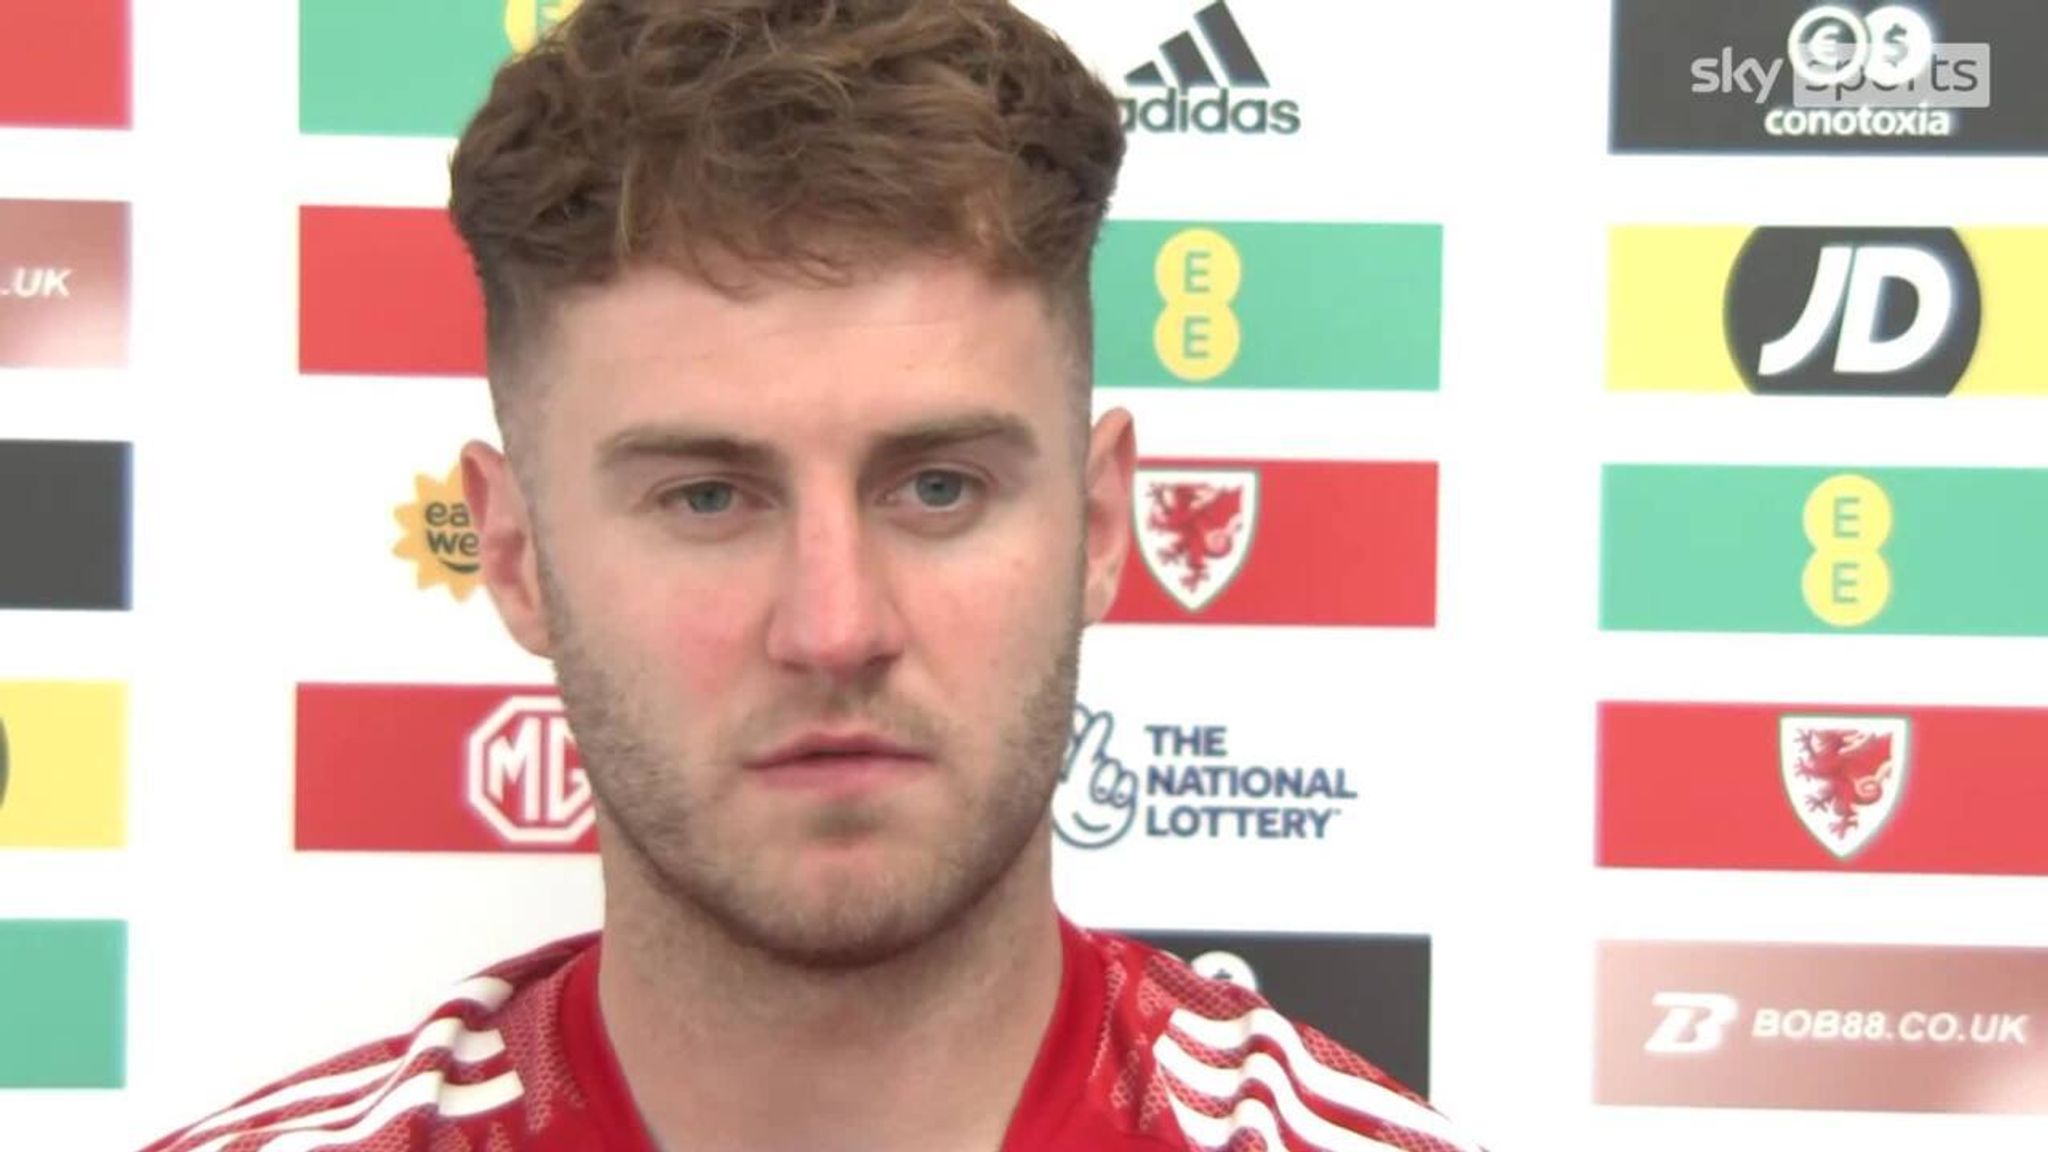 Joe Rodon 'grateful' for opportunity at Rennes, Video